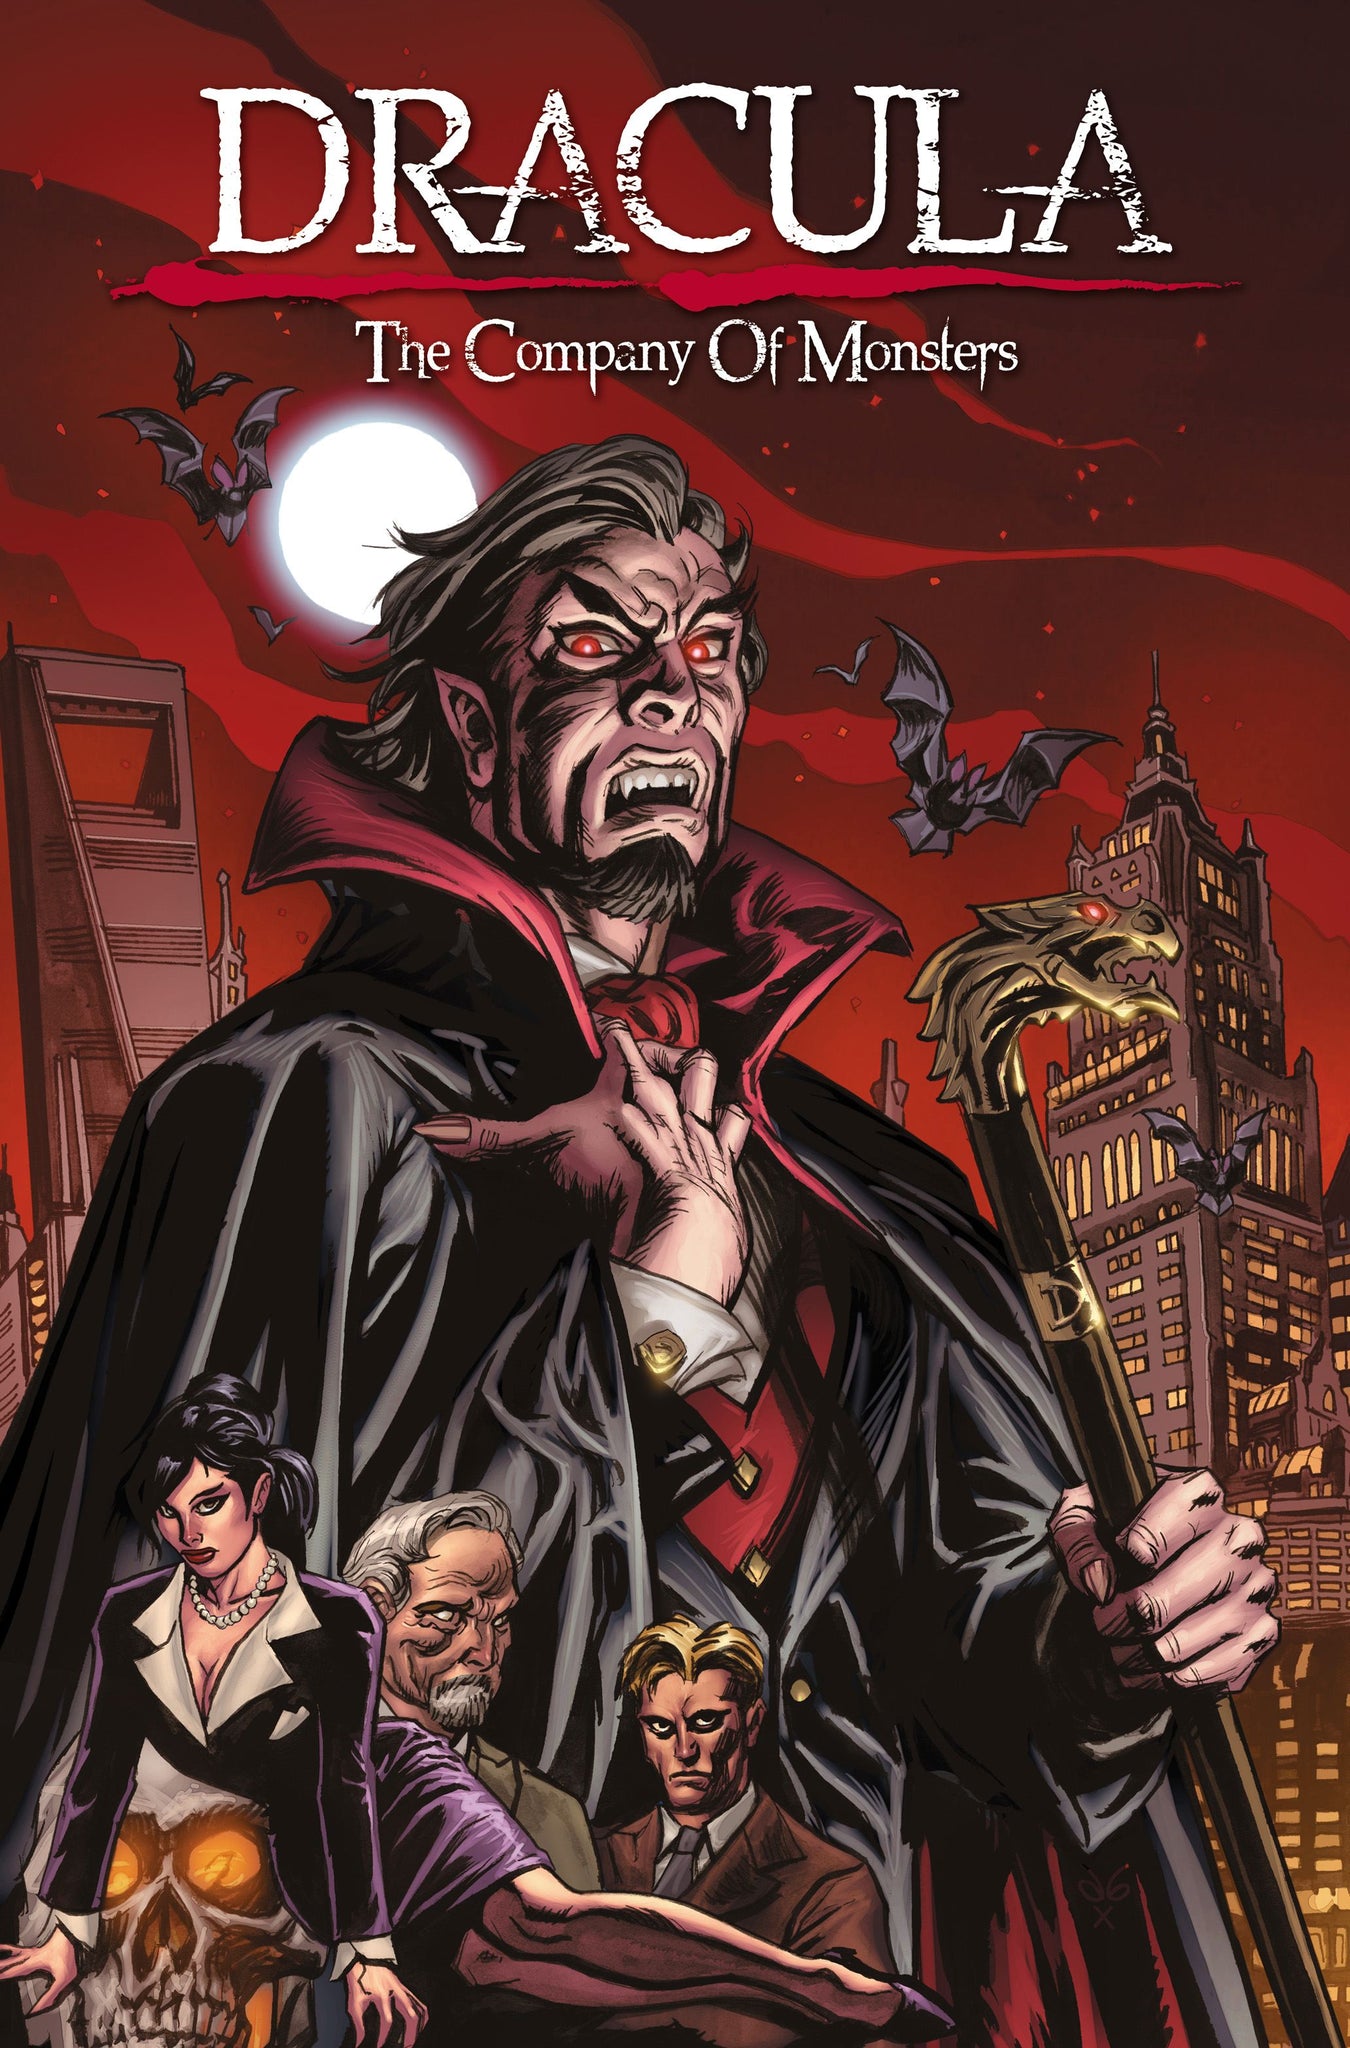 Dracula: The Company of Monsters Vol. 1